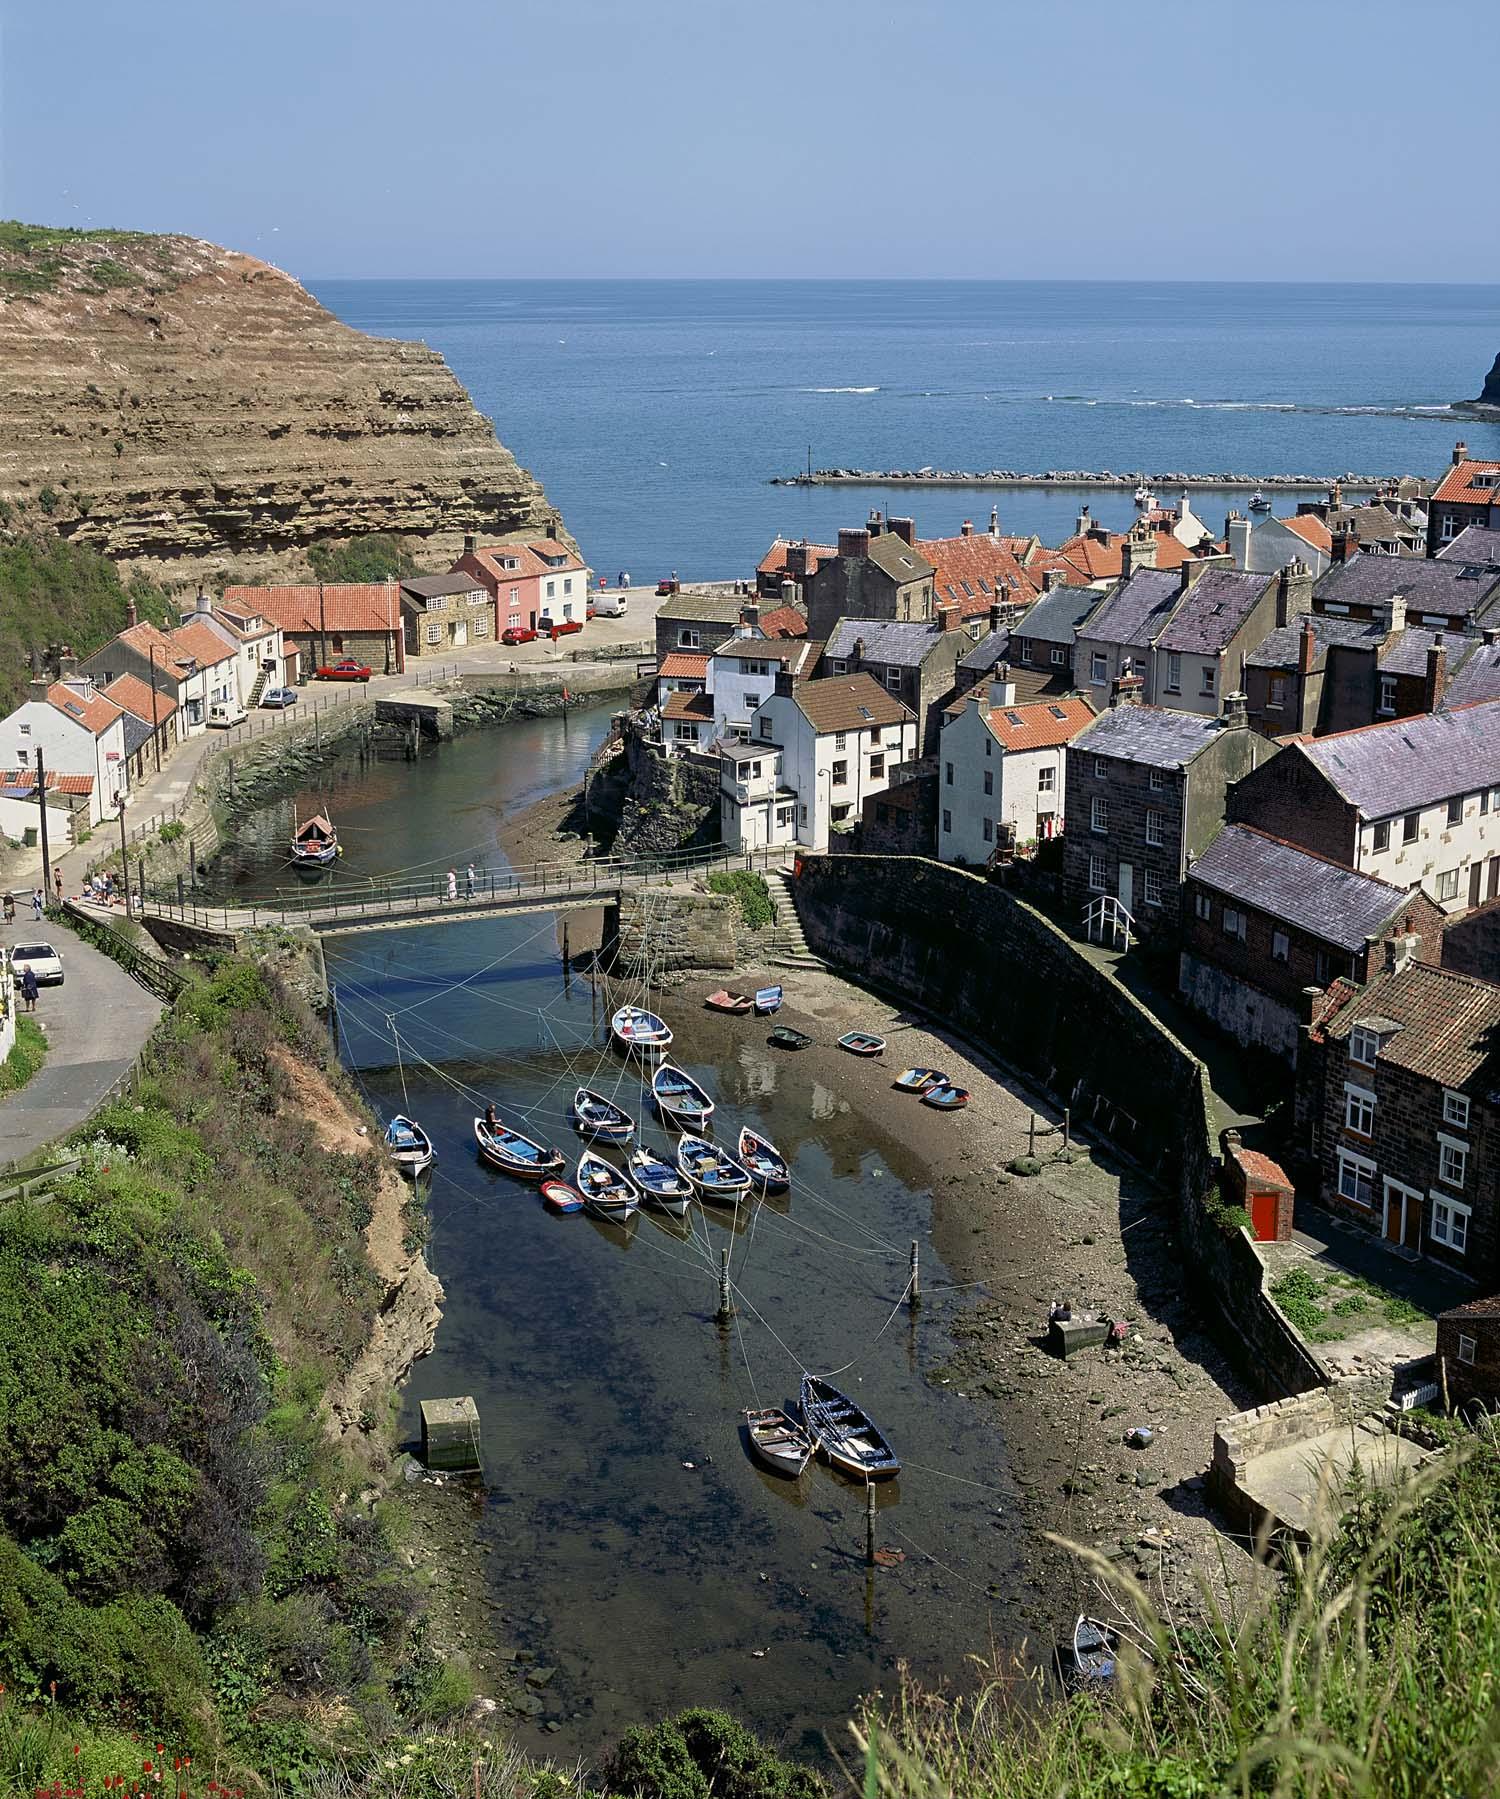 Walkers can now enjoy new views of Yorkshire seaside town Staithes thanks to the England Coast Path